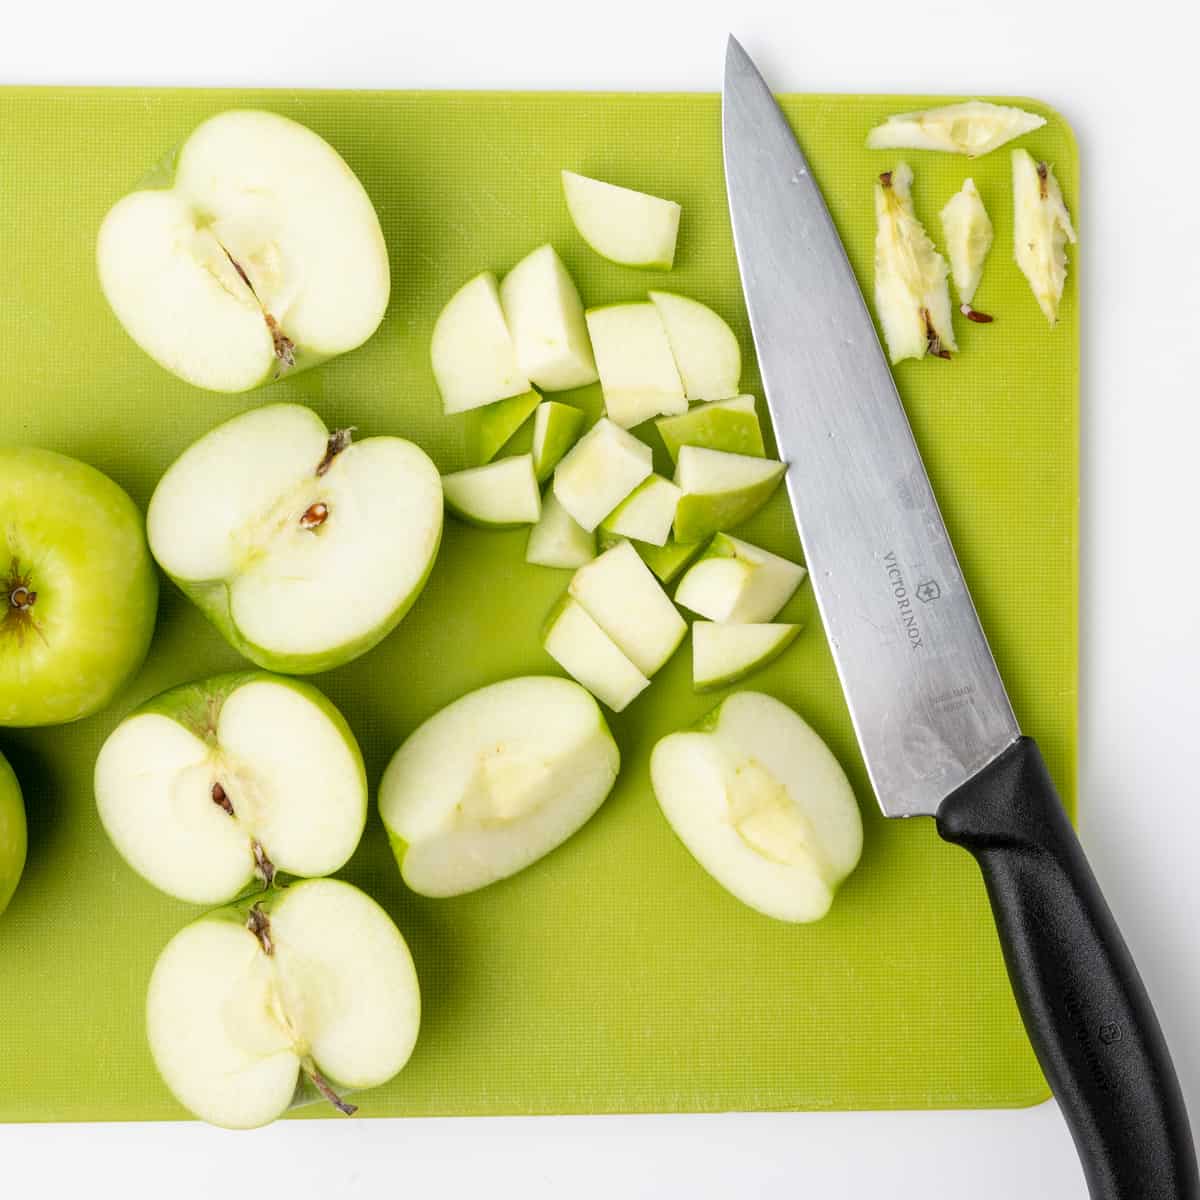 Coring and chopping apples on a green board.